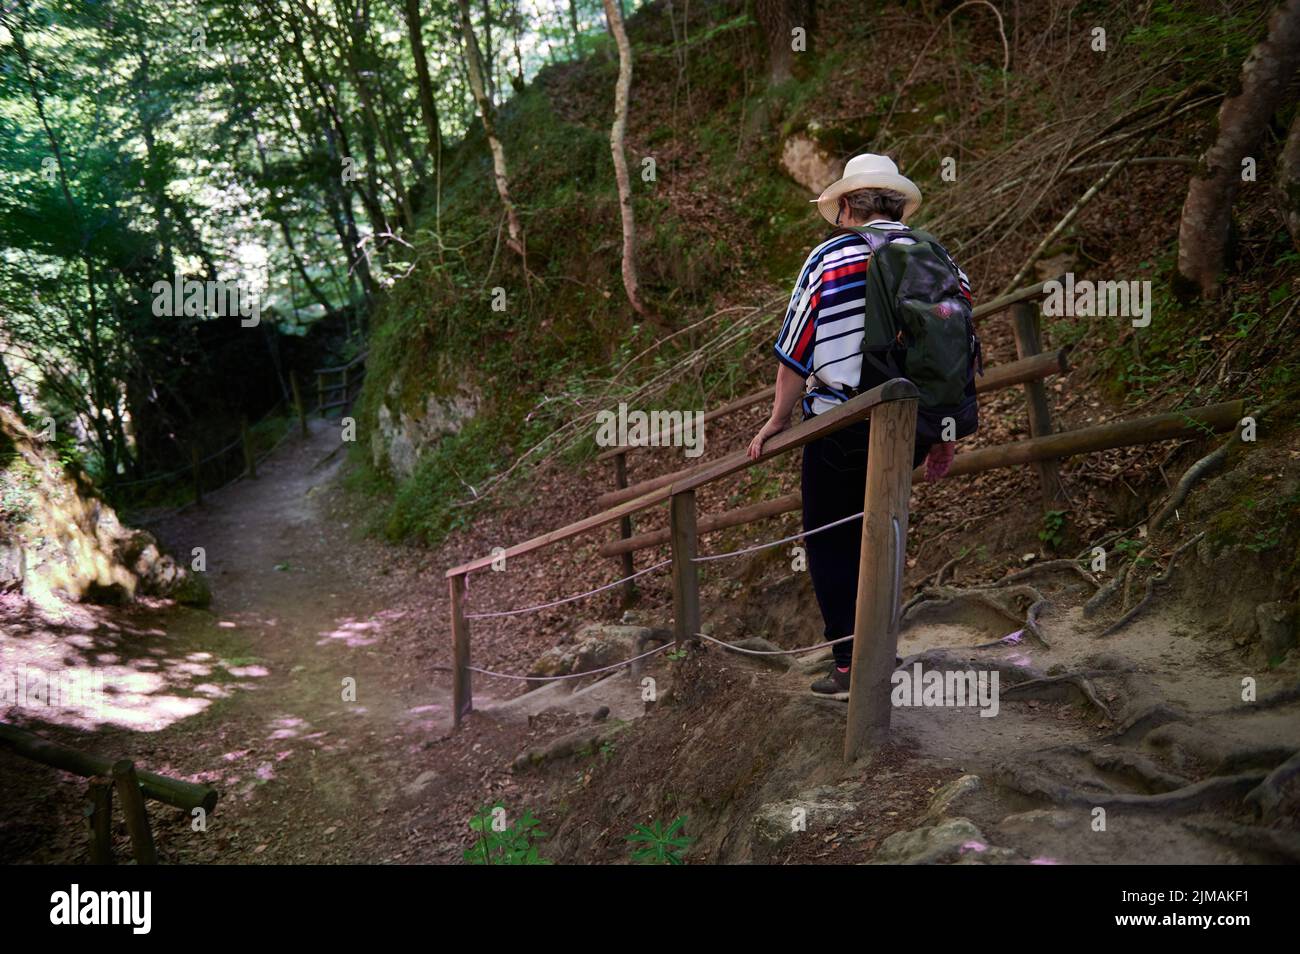 Middle-aged woman with hat and backpack walking, Baquedano, Navarra, Spain, Europe Stock Photo